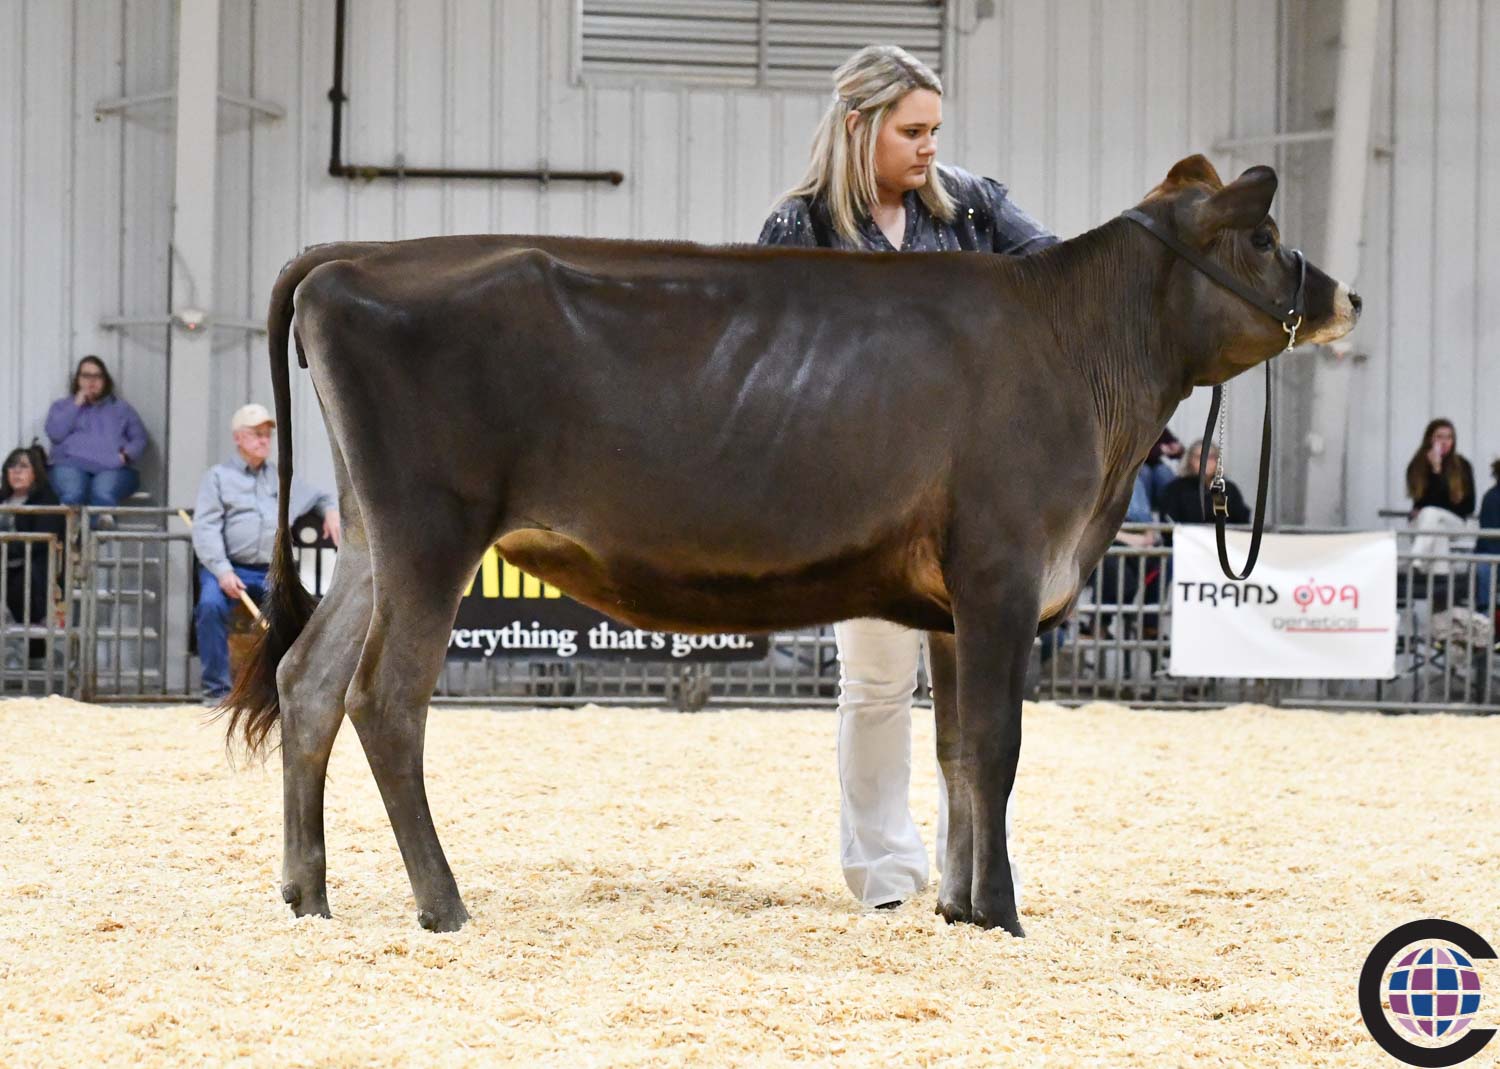 Southern Spring National Jersey Junior Show 2021 - Cowsmo